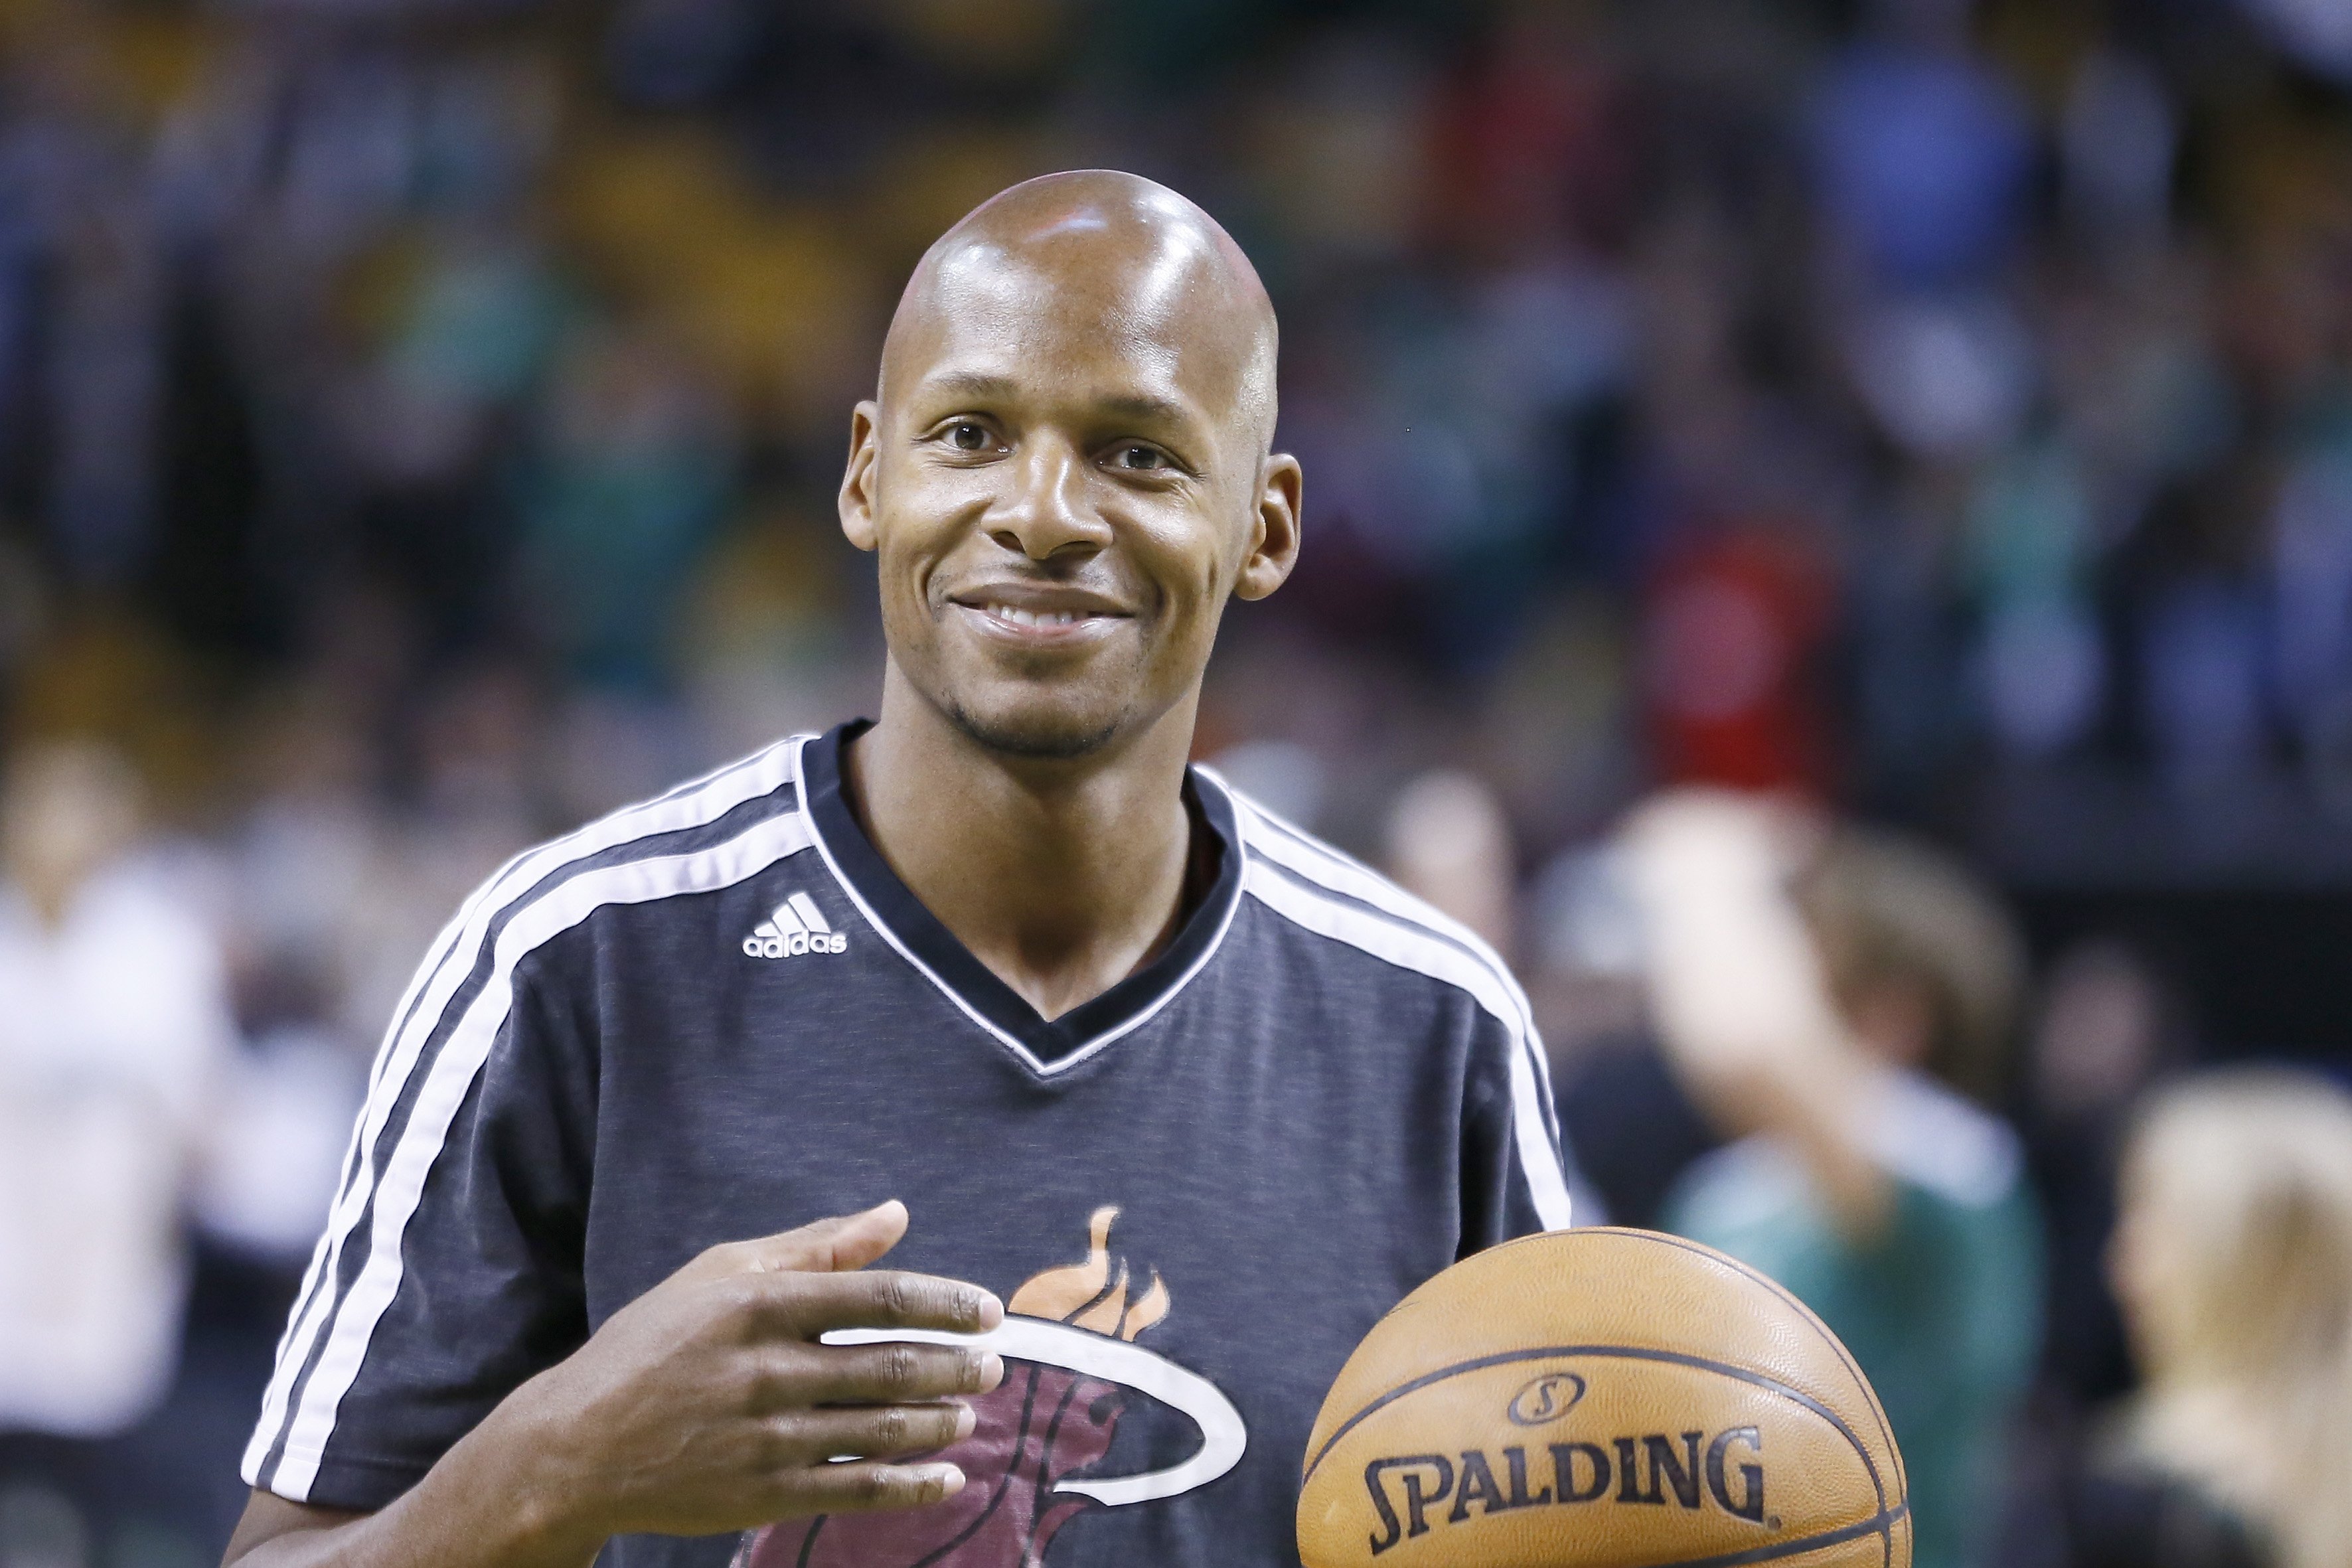 Ray Allen before the Miami Heat and Boston Celtics game at TD Garden on March 18, 2013 | Photo: Getty Images